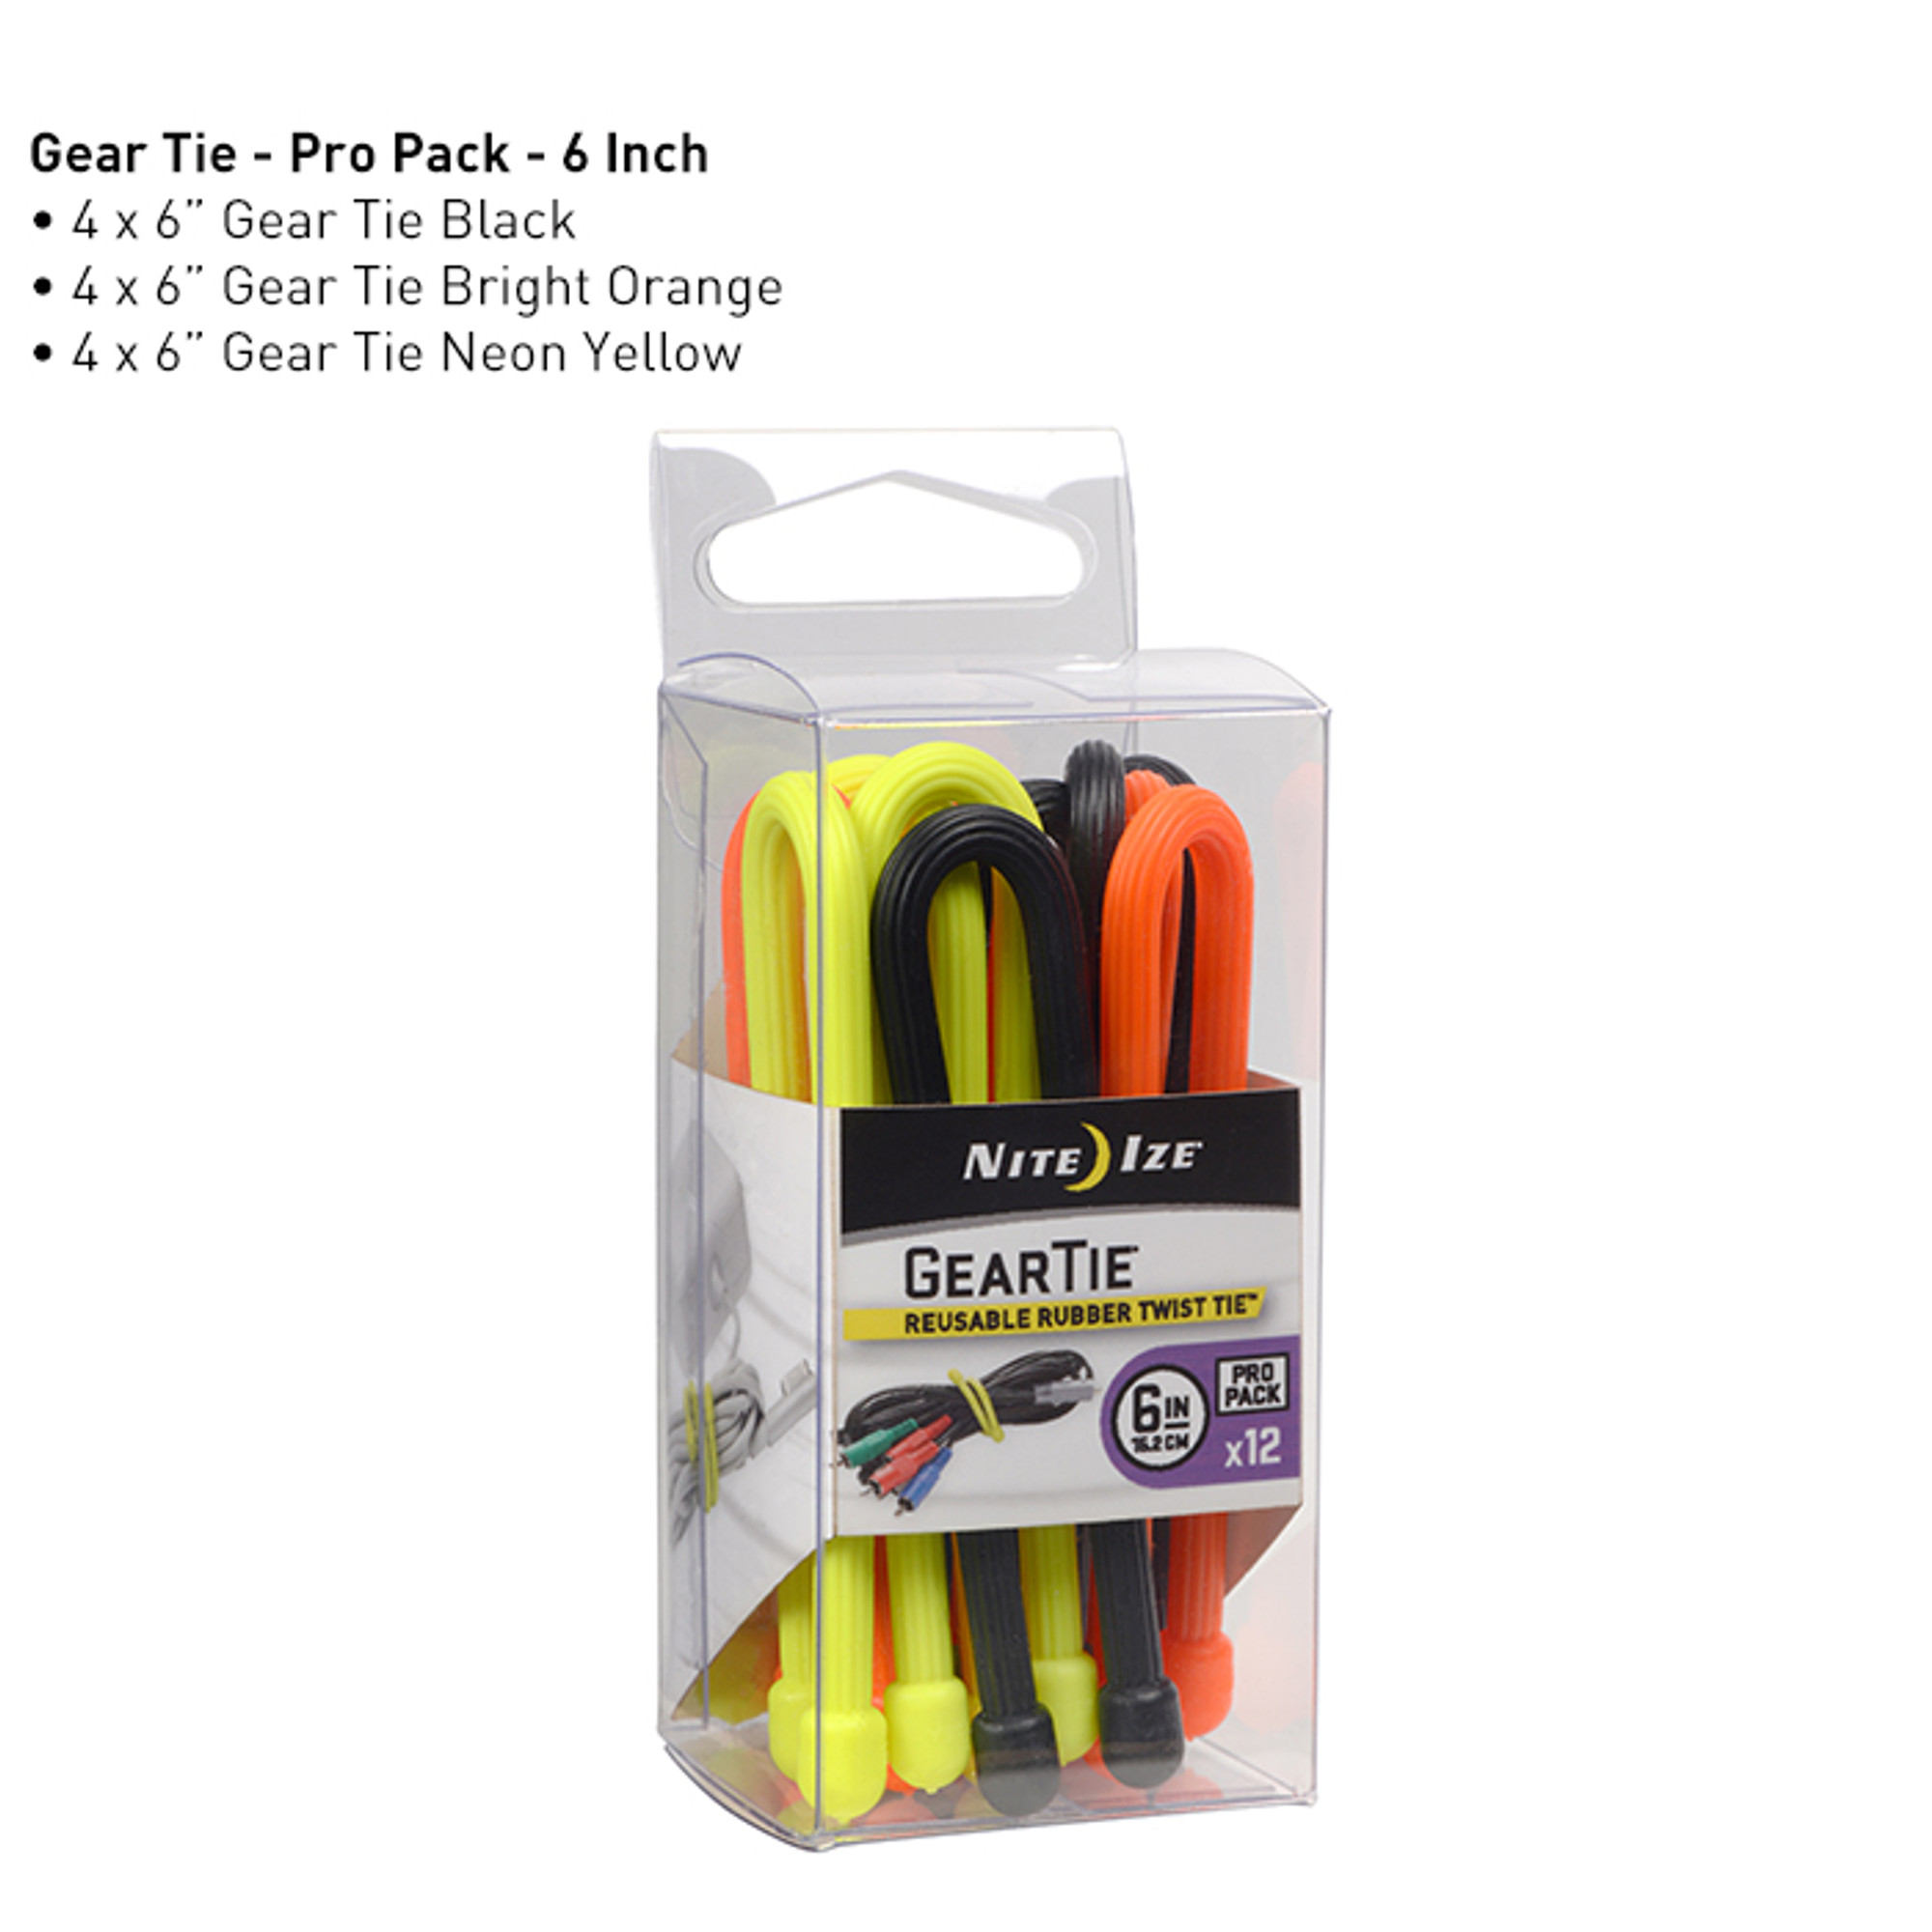 Gear Tie Propack 6 - 12 Pack - Assorted Colors